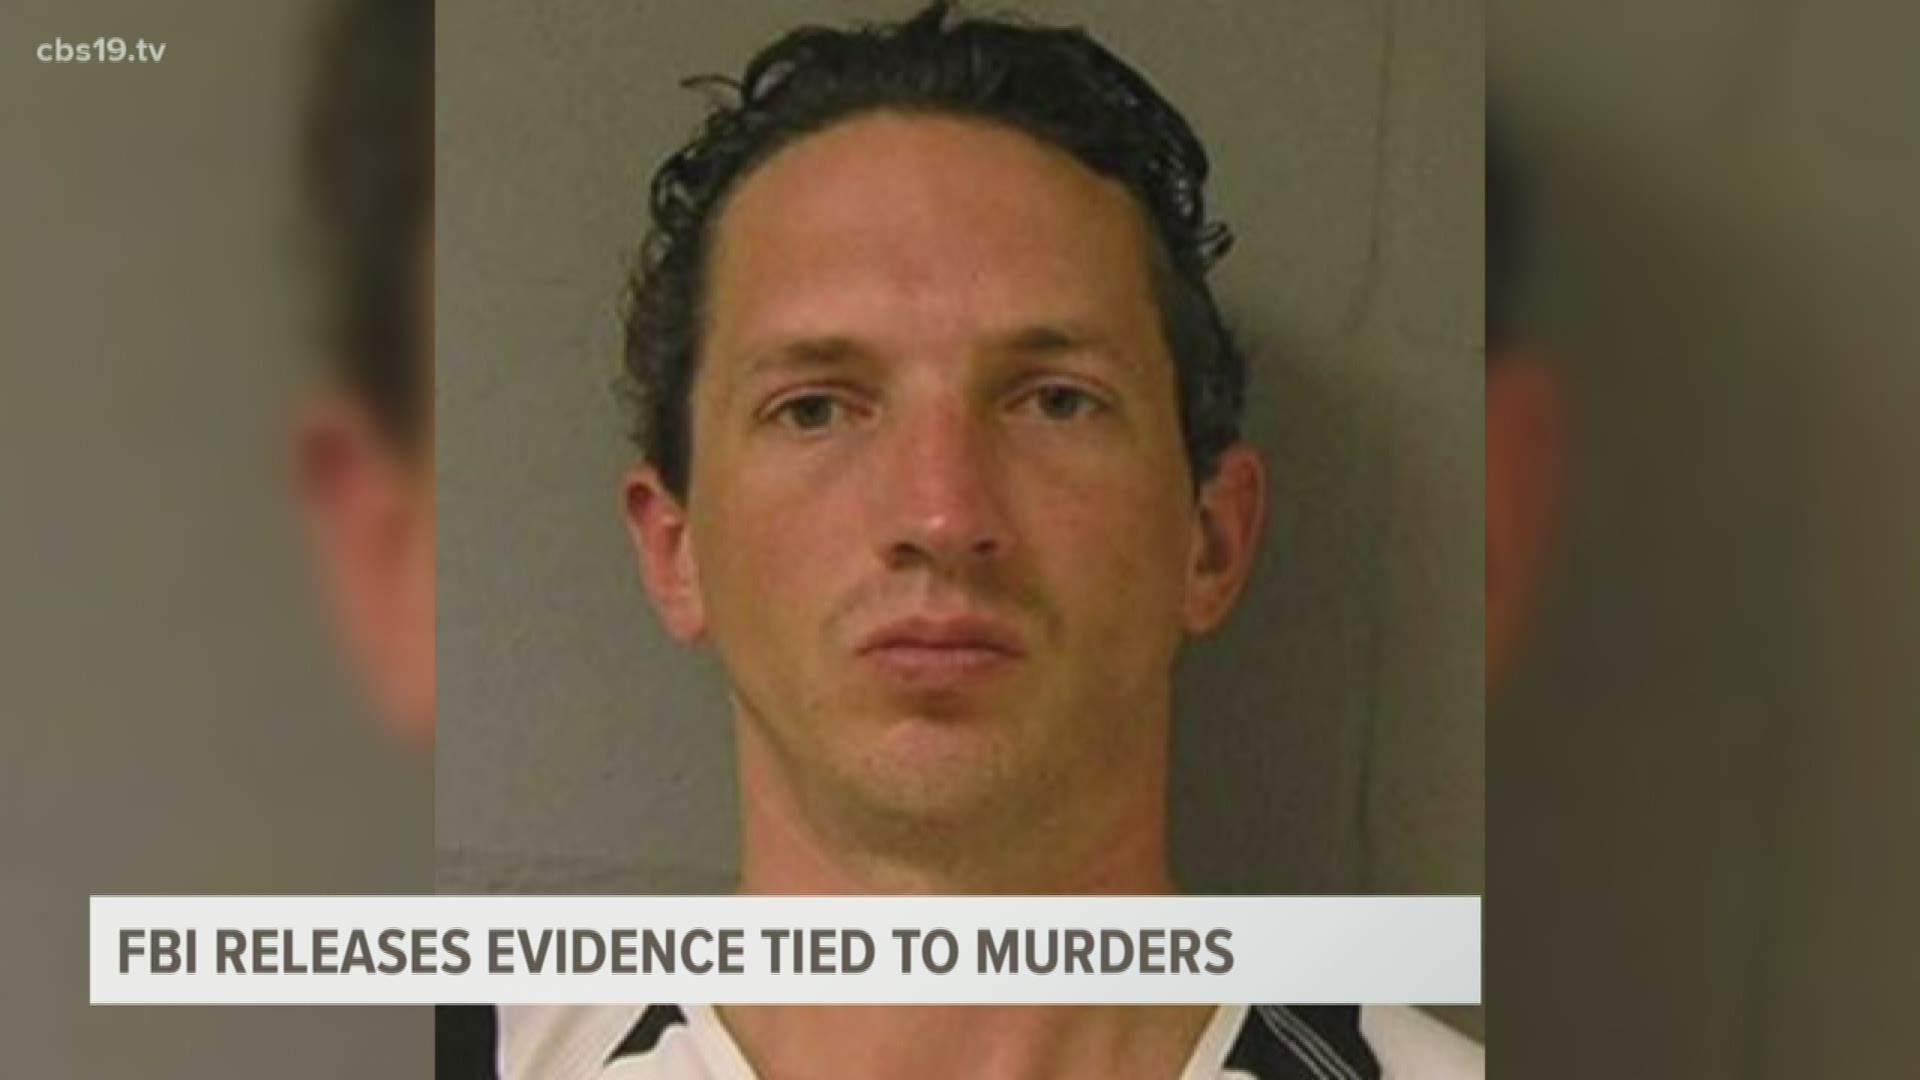 On Saturday's episode of CBS' 48 Hours, FBI agents revealed pictures of skulls made by Israel Keyes that had been drawn in his own blood.